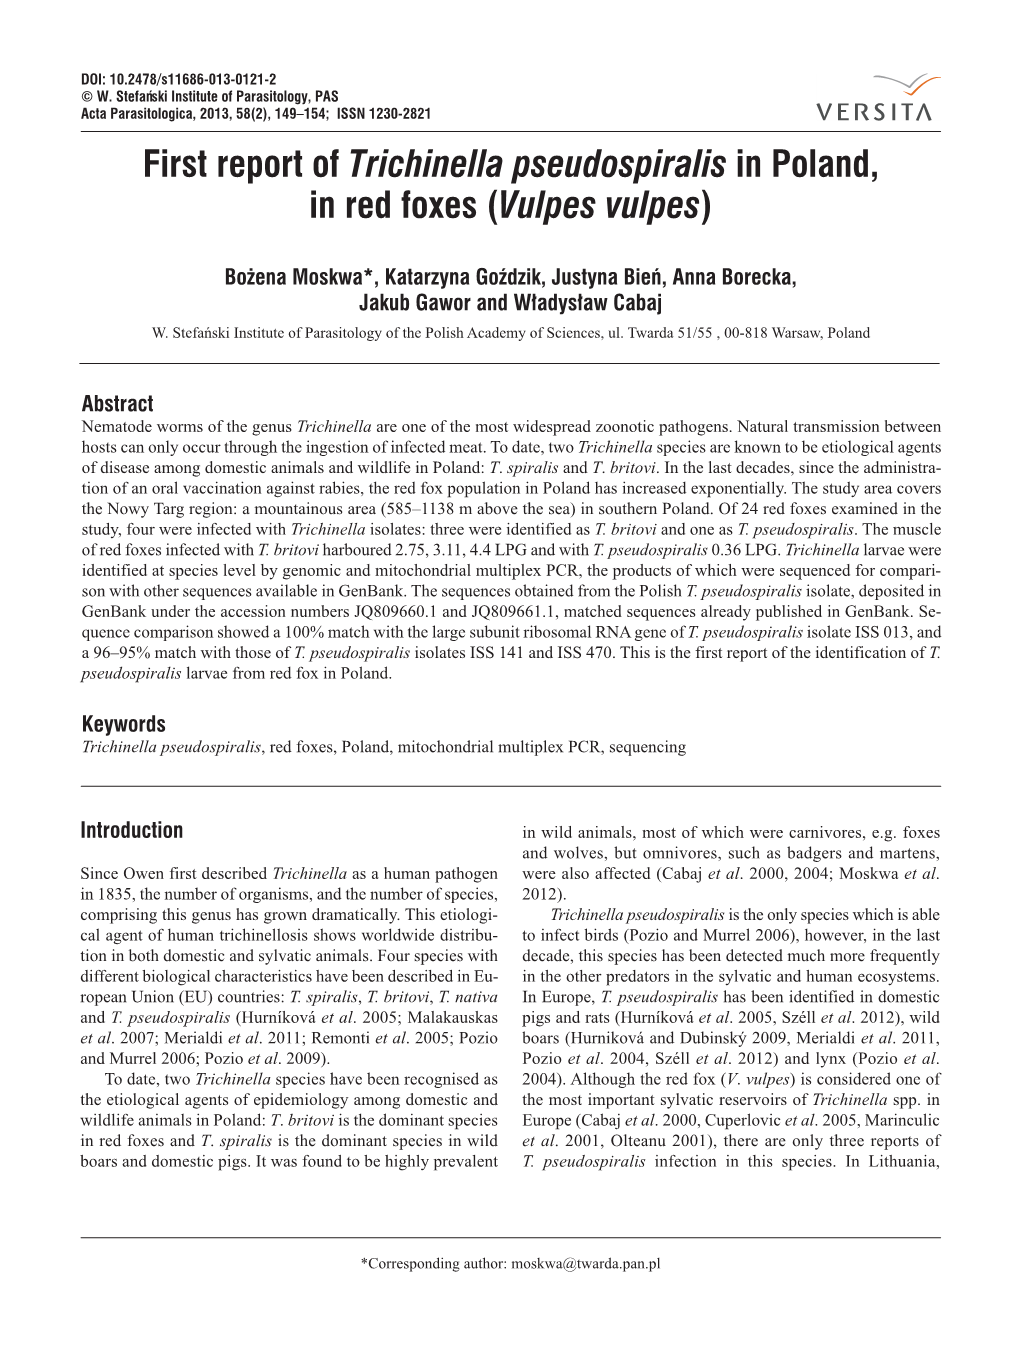 First Report of Trichinella Pseudospiralis in Poland, in Red Foxes (Vulpes Vulpes)